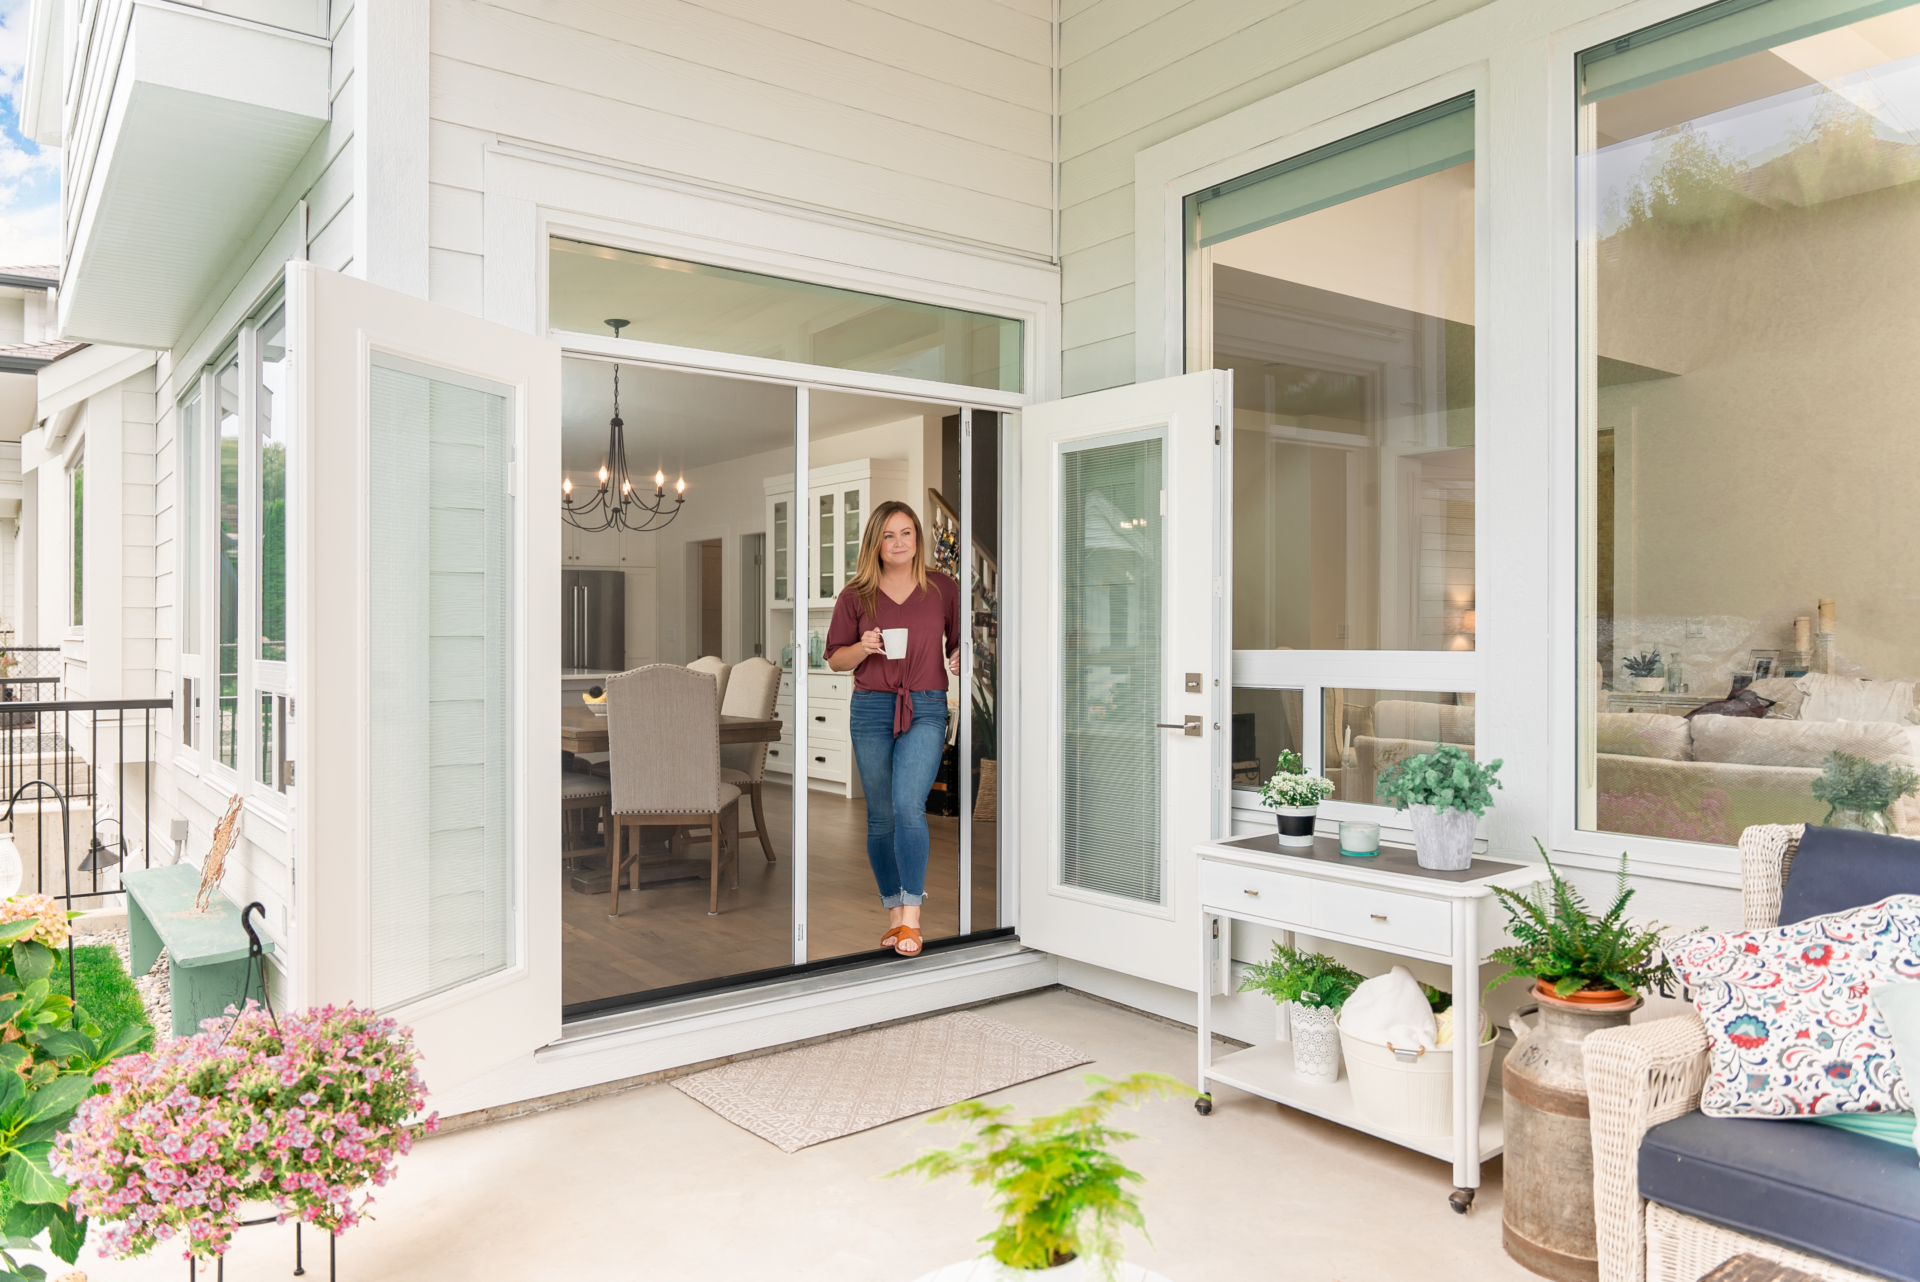 Woman opens her Phantom Retractable Screen on her french doors to let fresh air into her home.